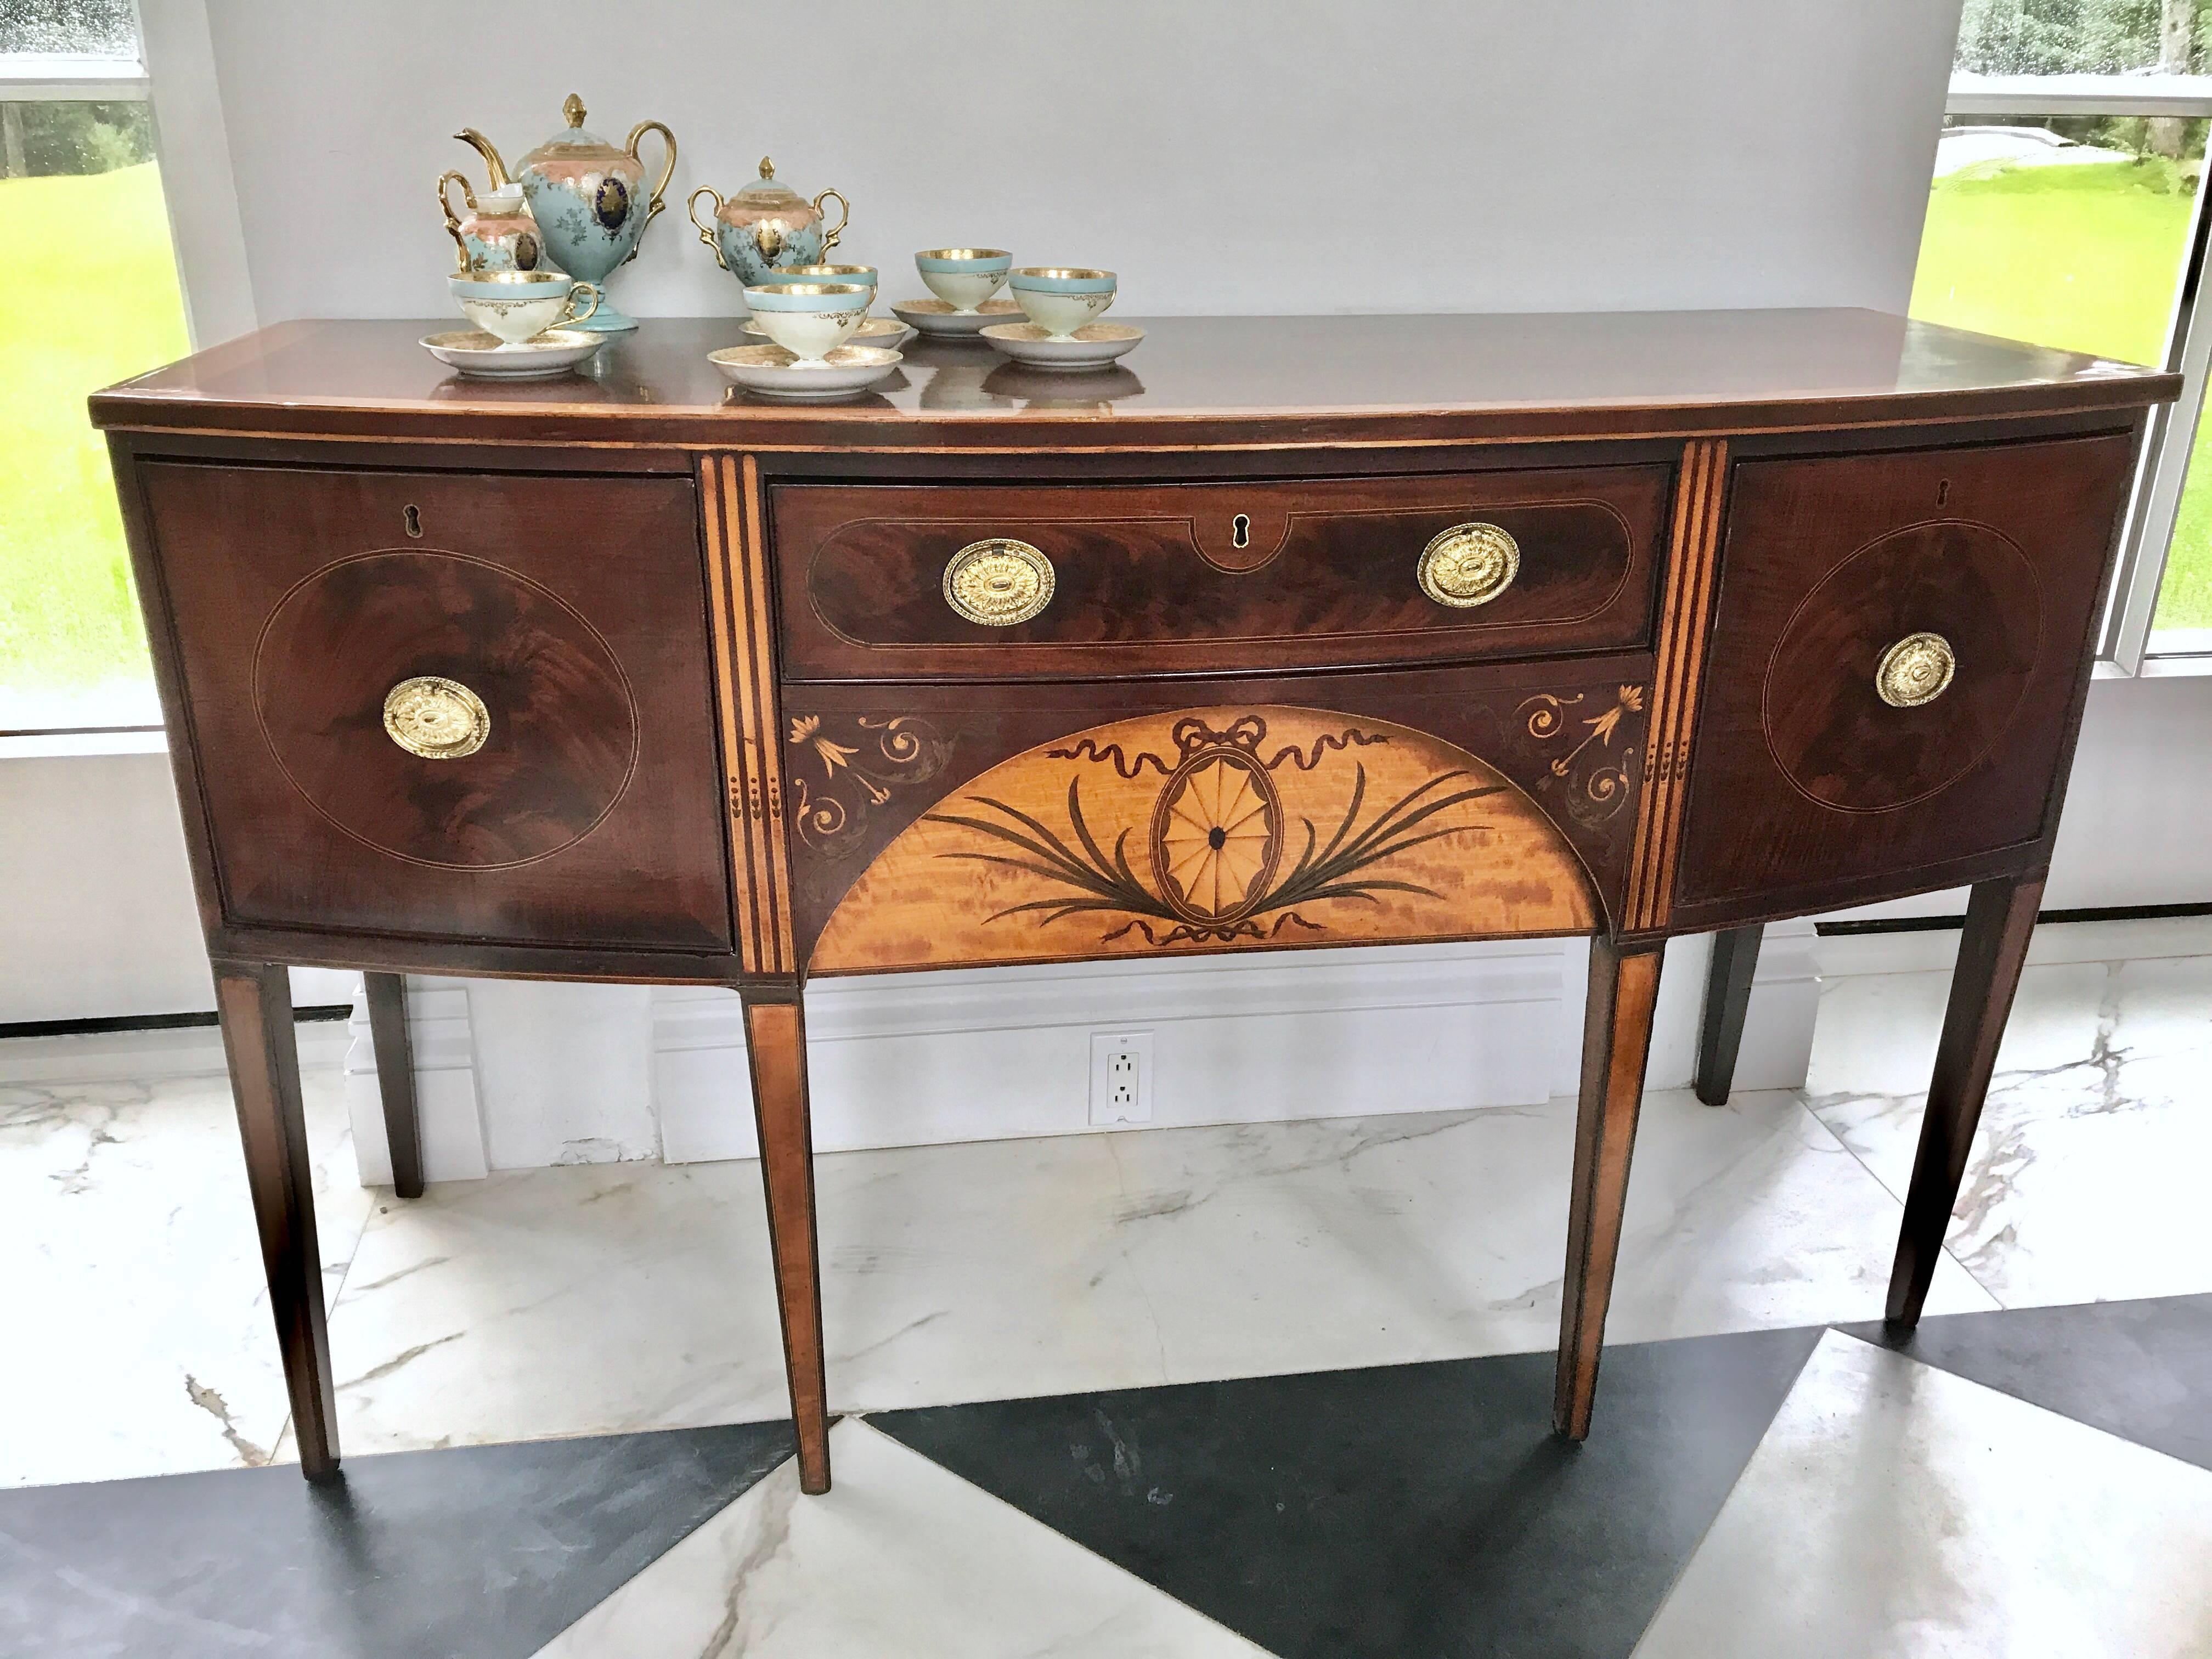 A fine Hepplewhite period sideboard, attributed to one of the finest English furniture makers Mayhew & Ince.
It is elaborately inlaid with contrasting satinwood.
The central arch is inlaid with kingwood, tulipwood and olivewood palms, ribbons and